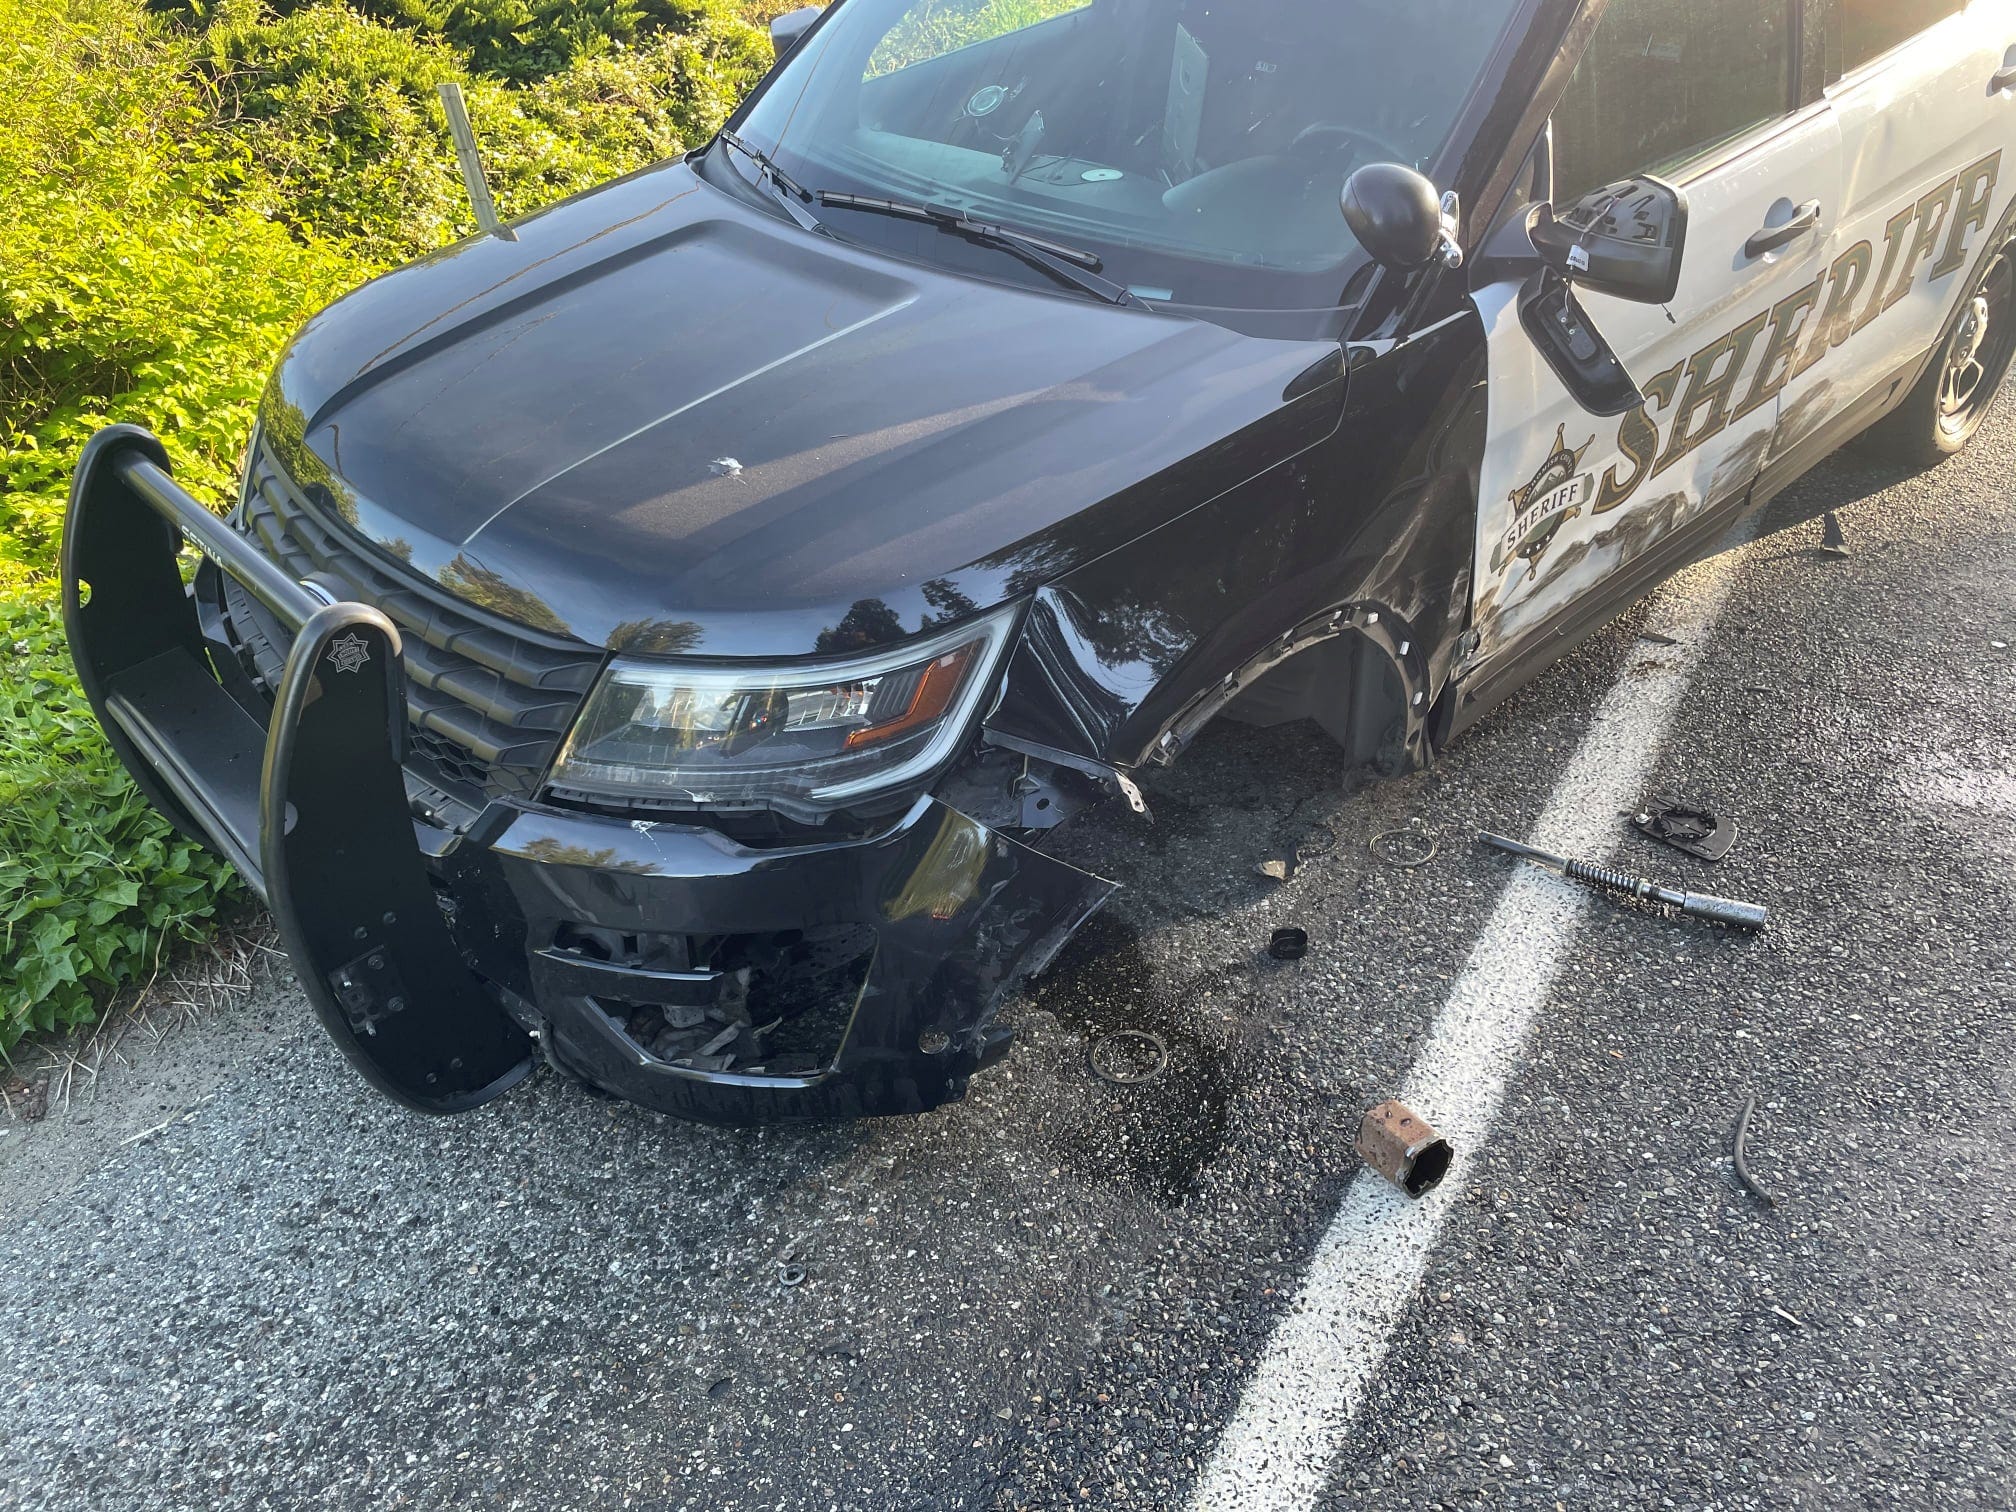 A deputy's vehicle has significant damage from a Tesla on Autopilot crashing into it